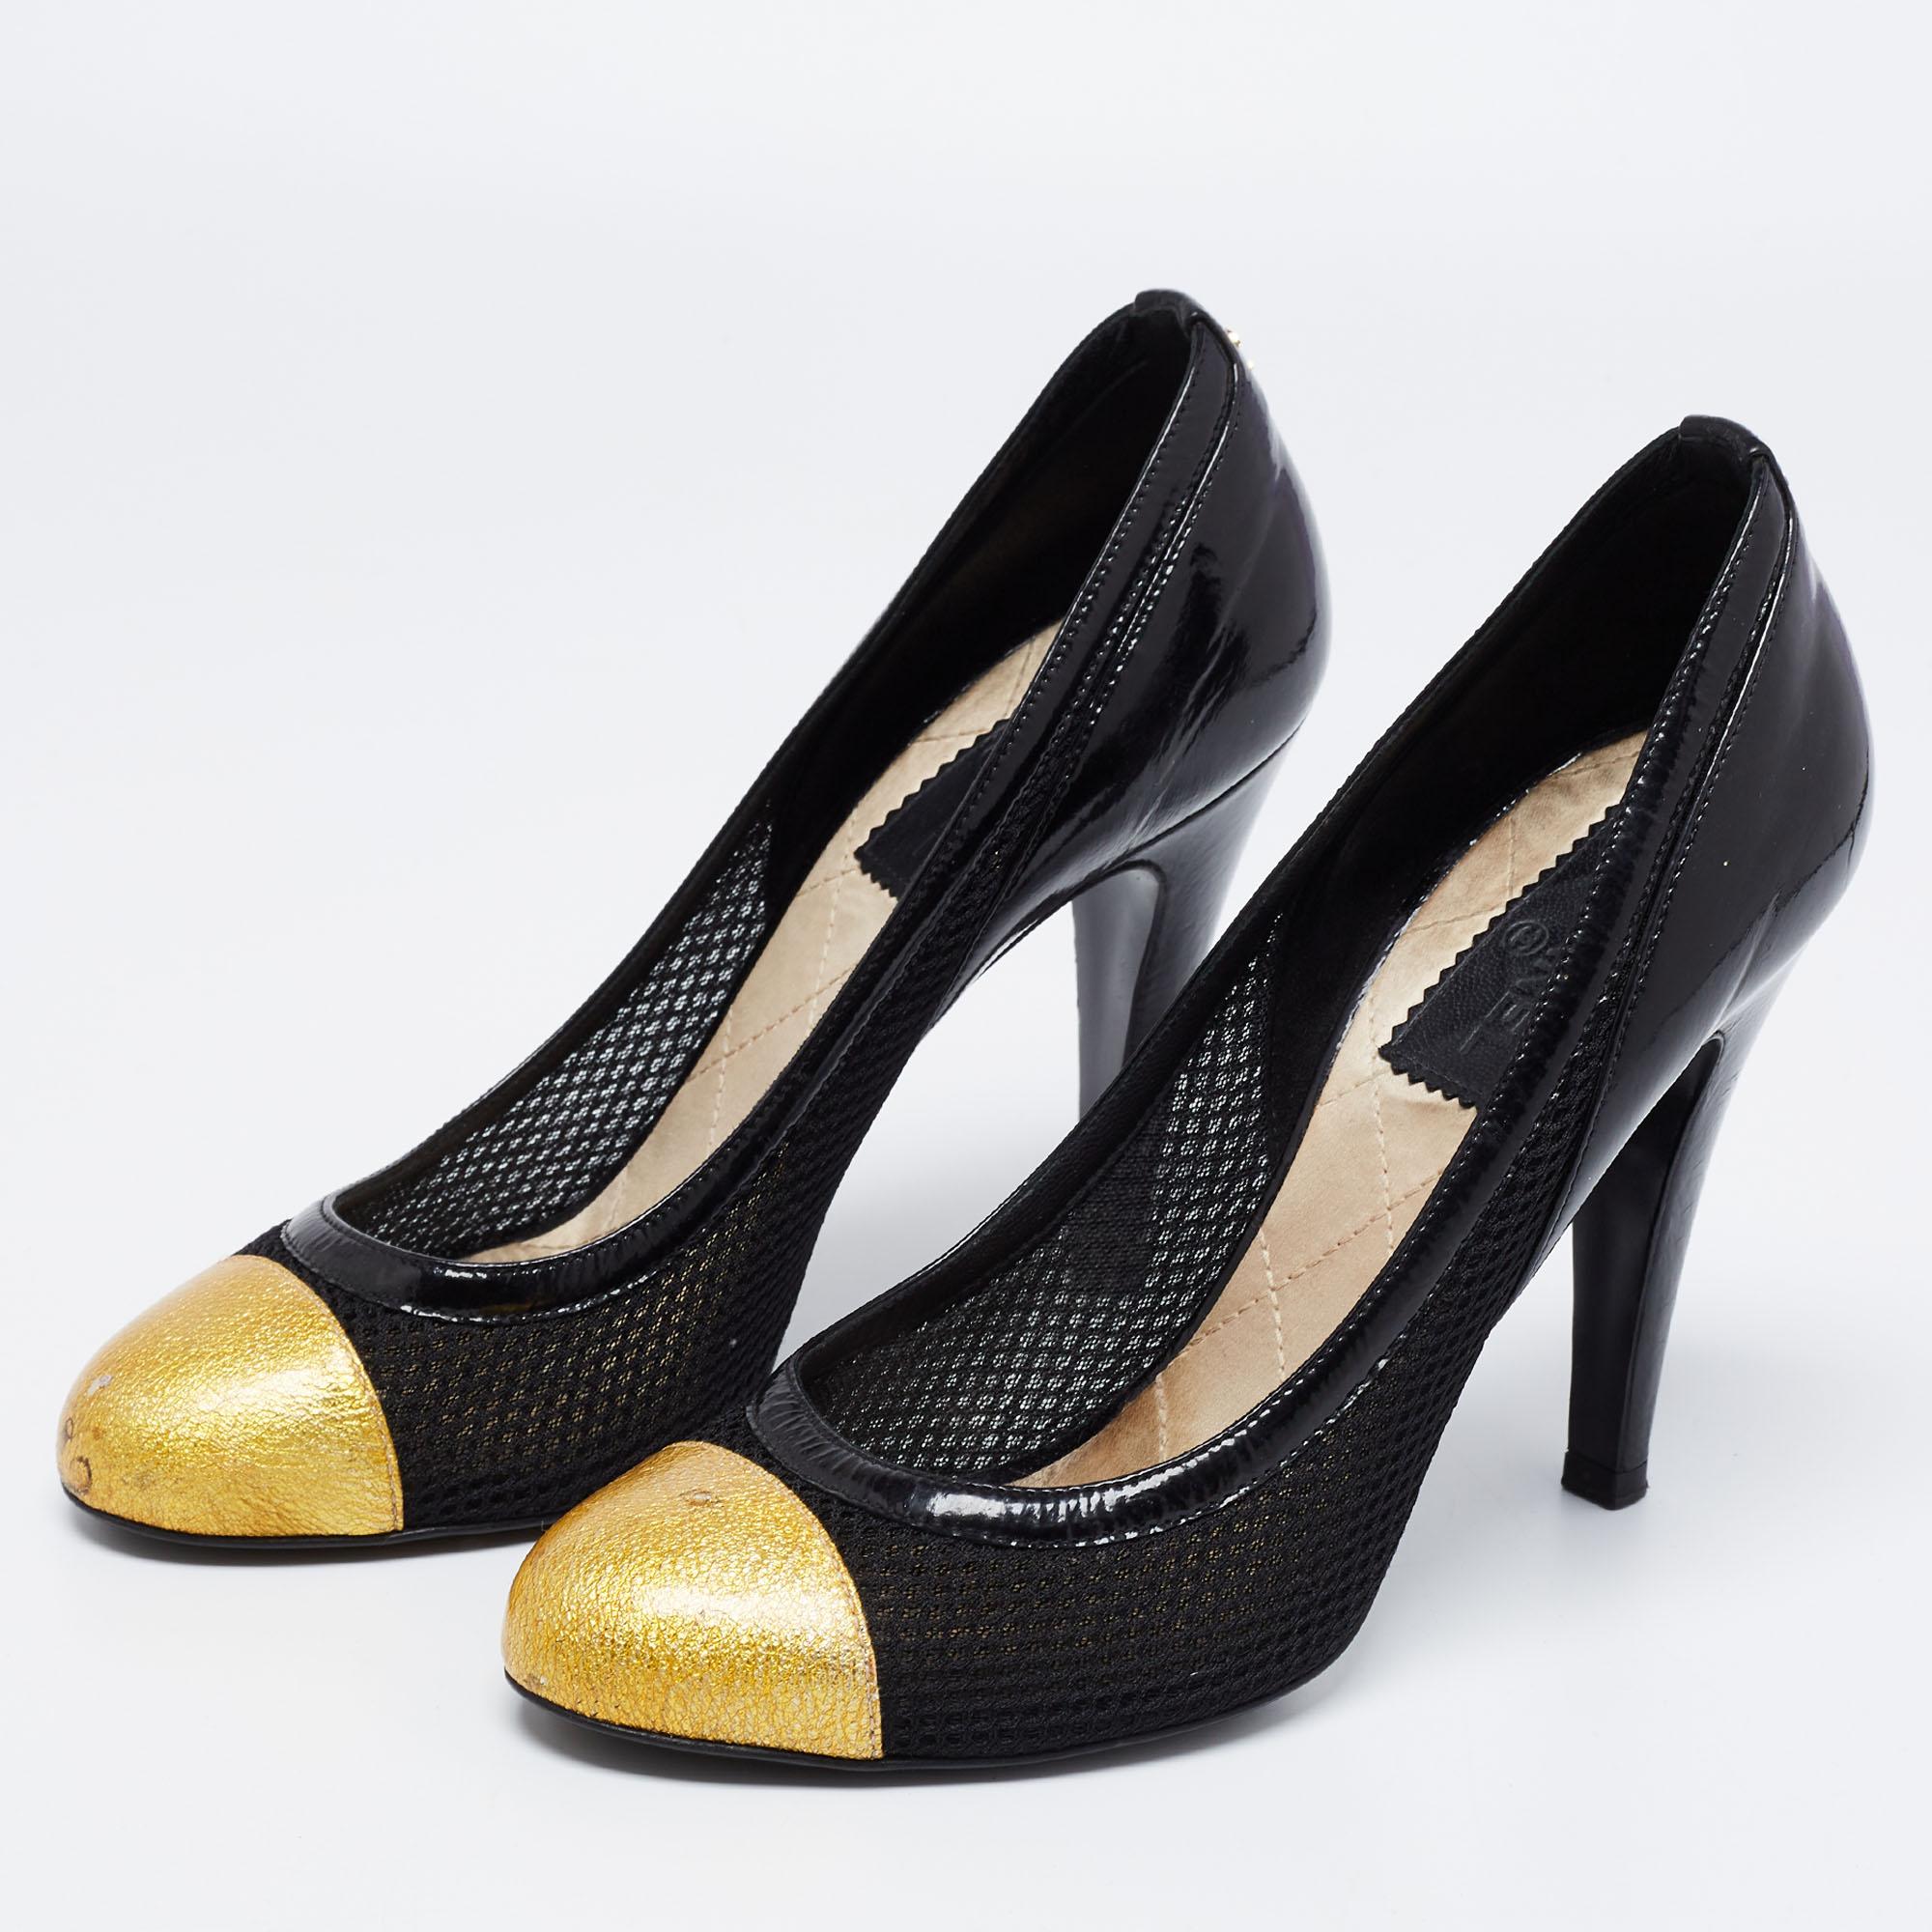 Women's Chanel Black/Yellow Mesh, Patent and Textured Leather Cap-Toe Pumps Size 39 For Sale